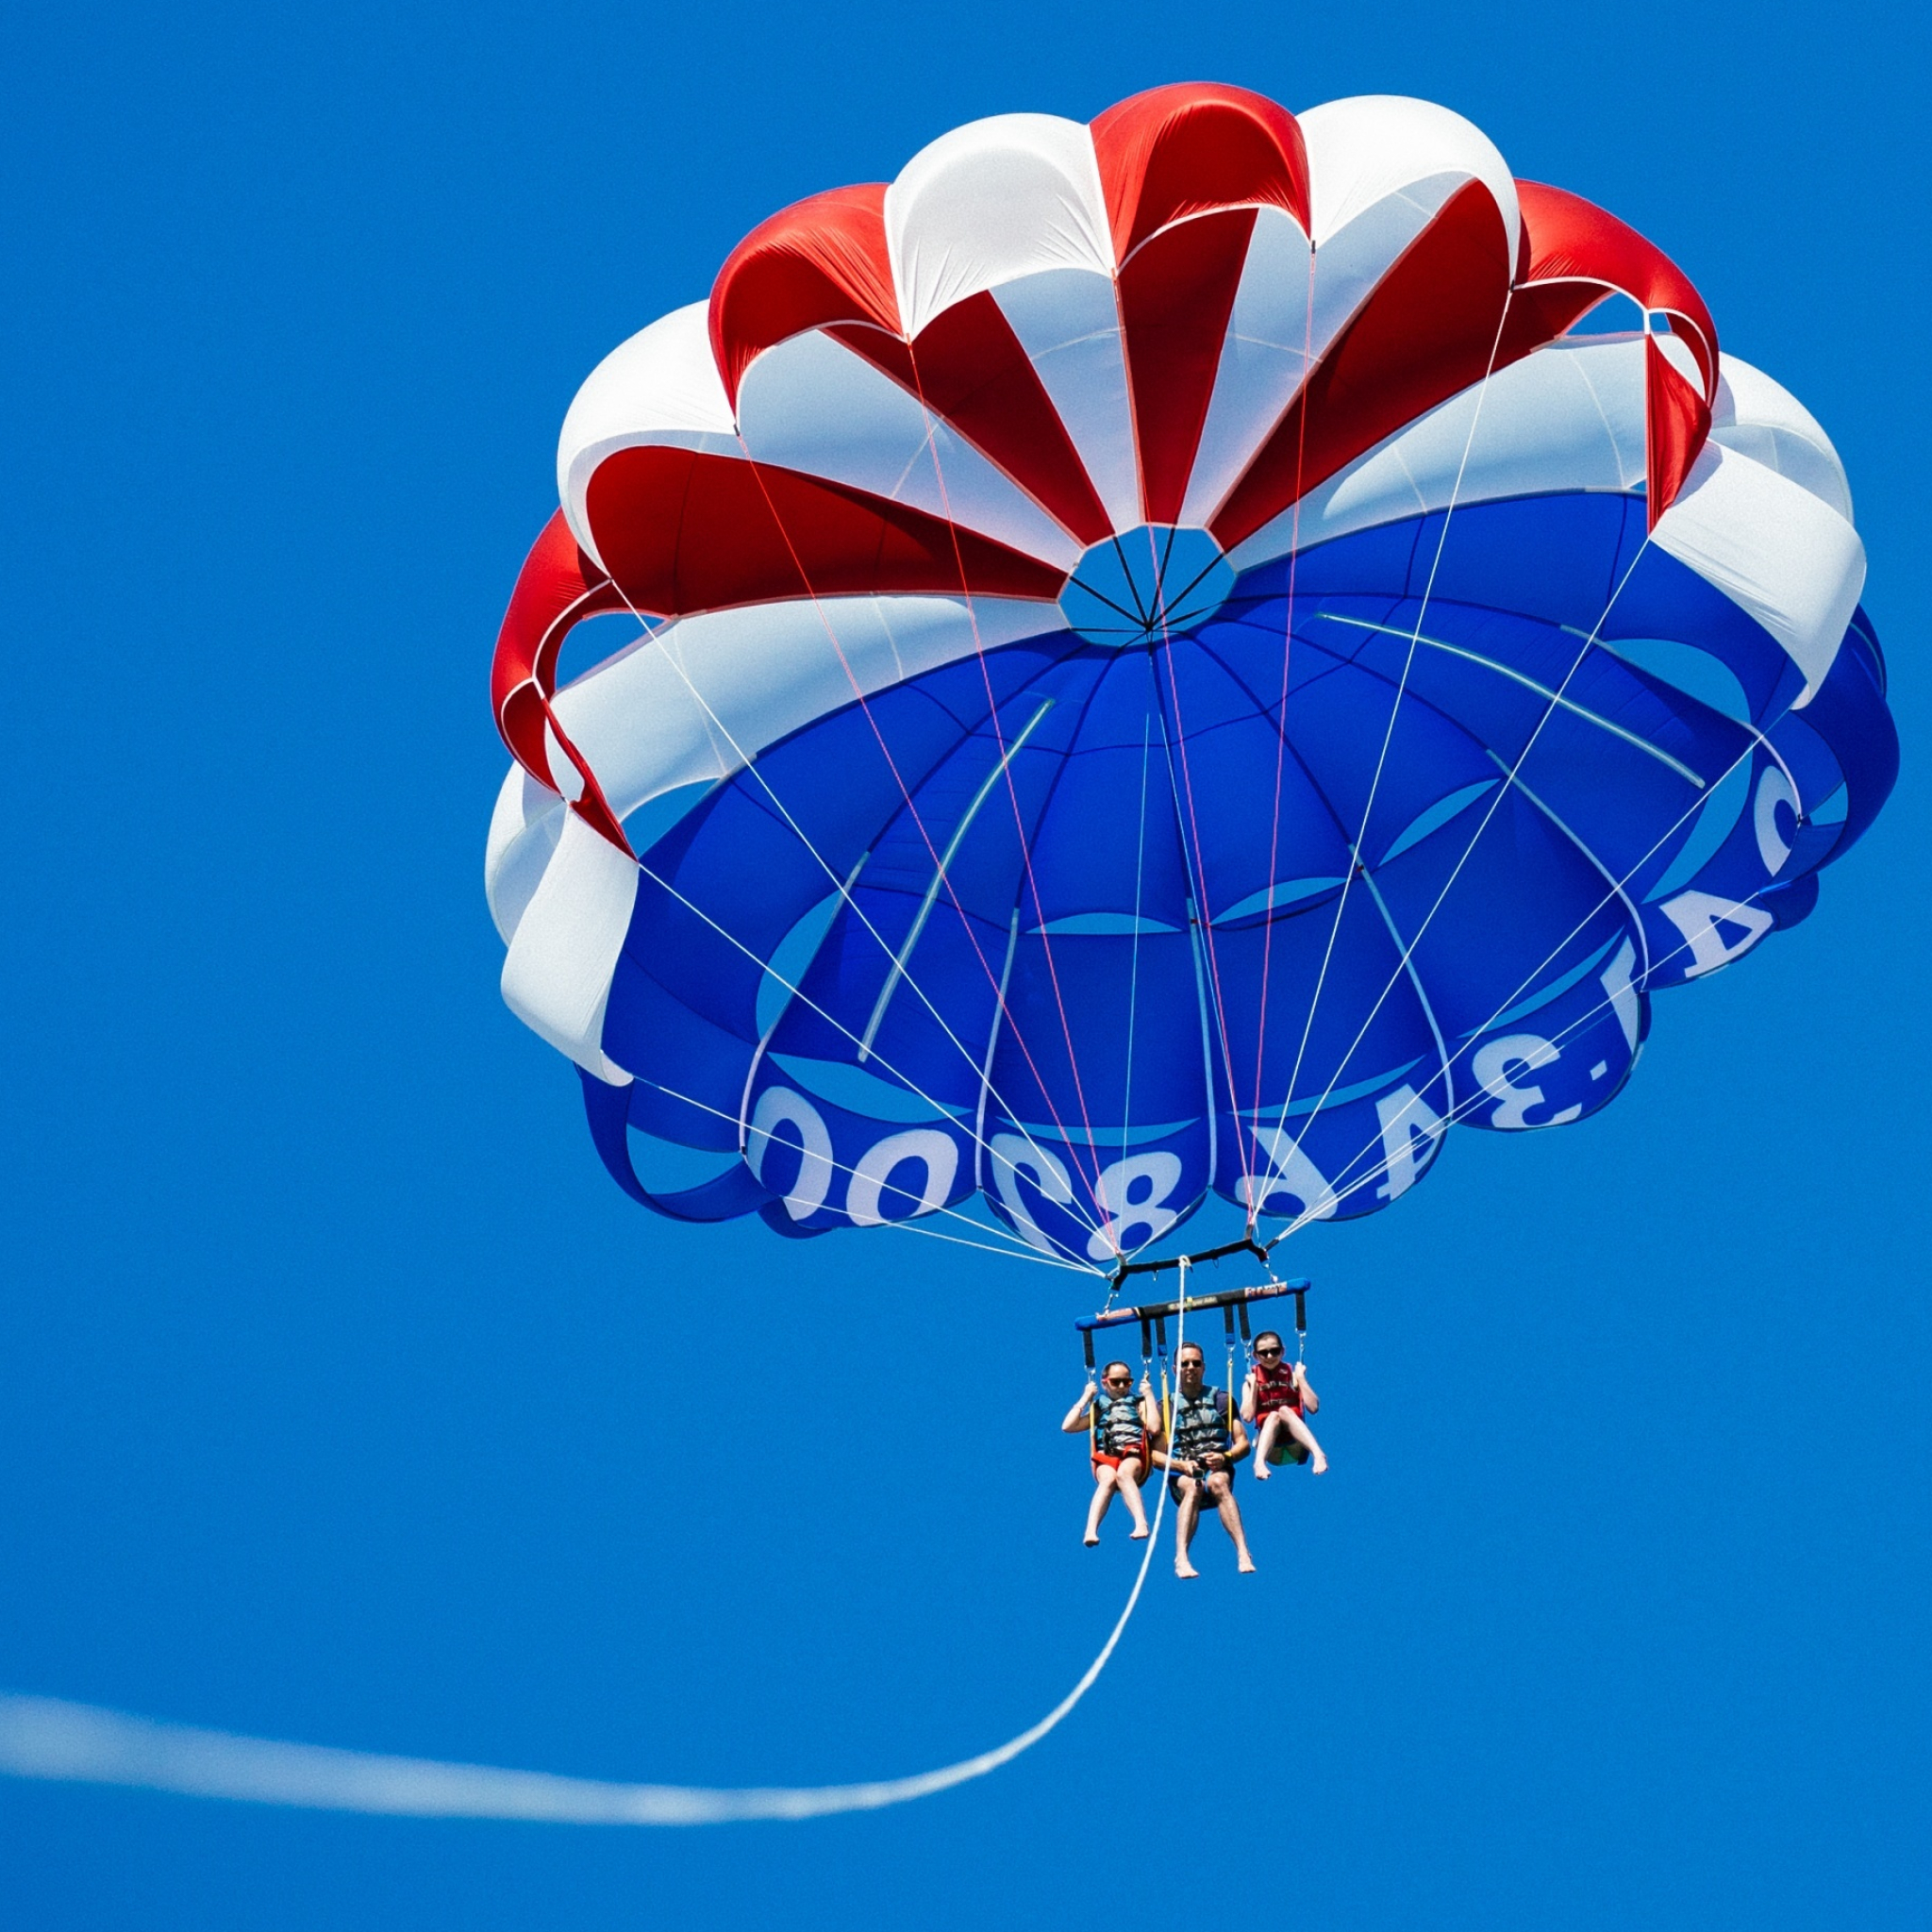 Parasailing: Three people parakiting, The weight limit, The water and wind condition, A parasail wing. 2050x2050 HD Background.